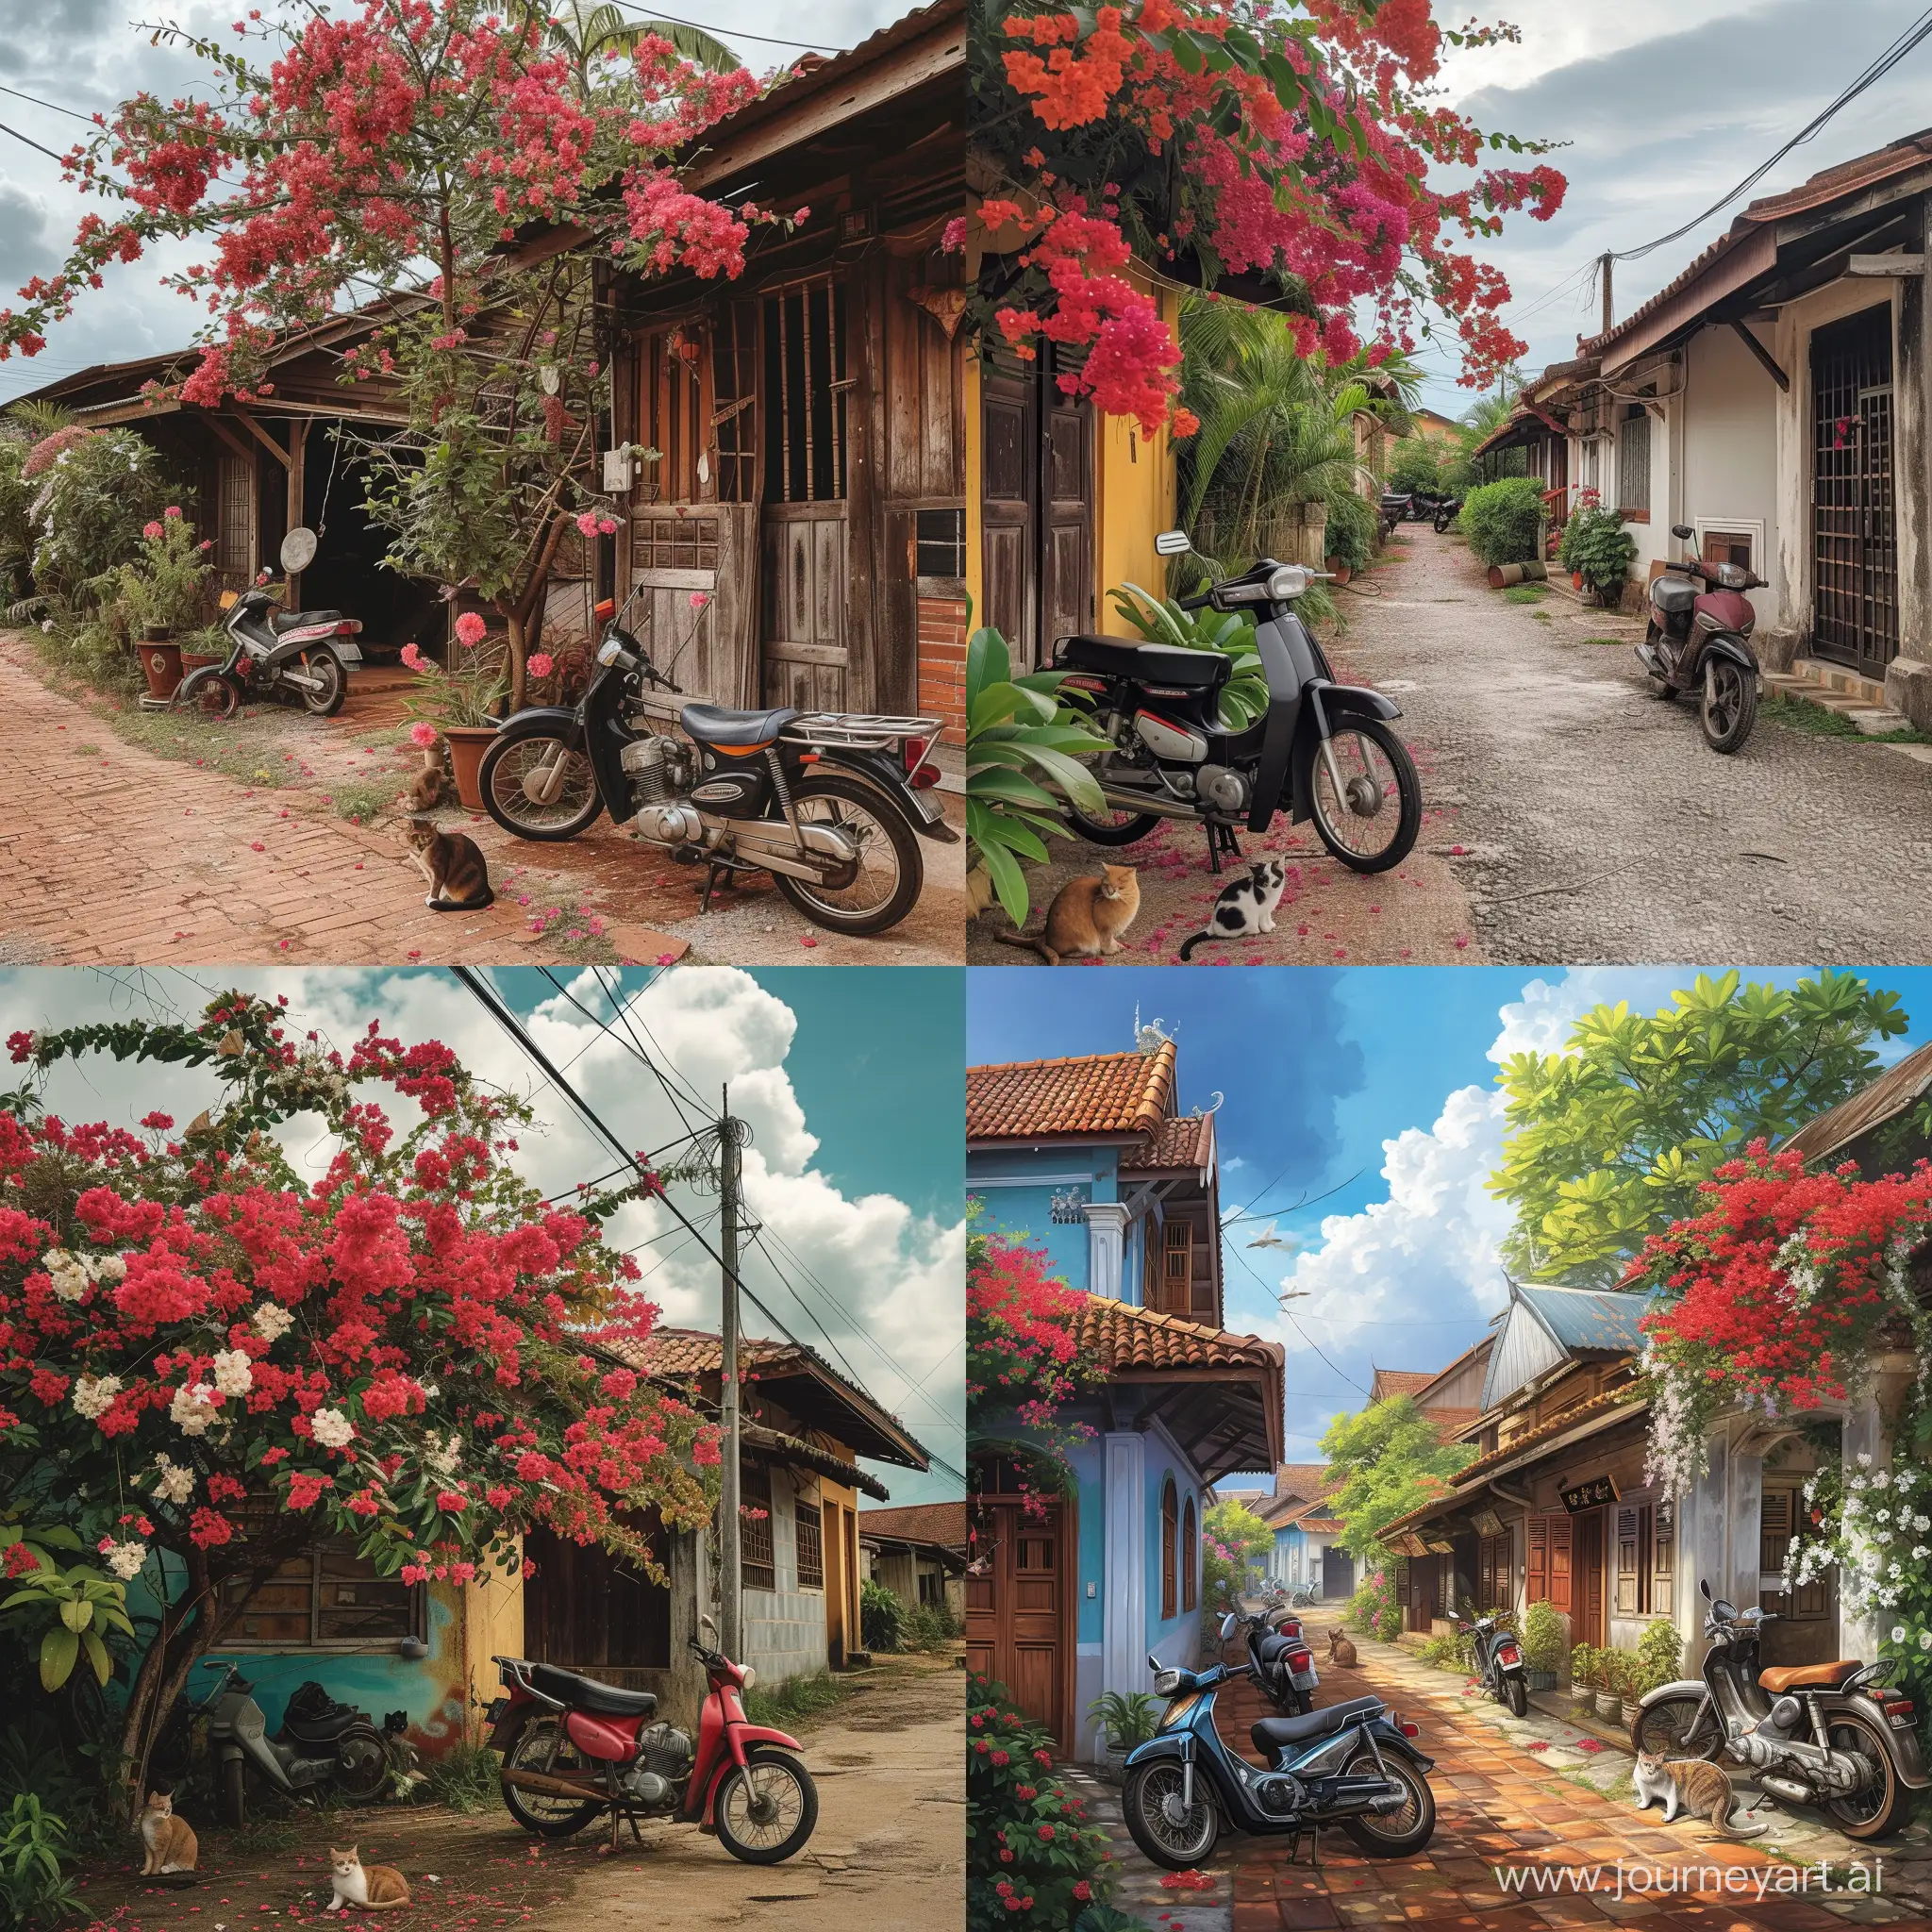 Beautiful Malay village houses, flower trees, cats, old motorcycles, 